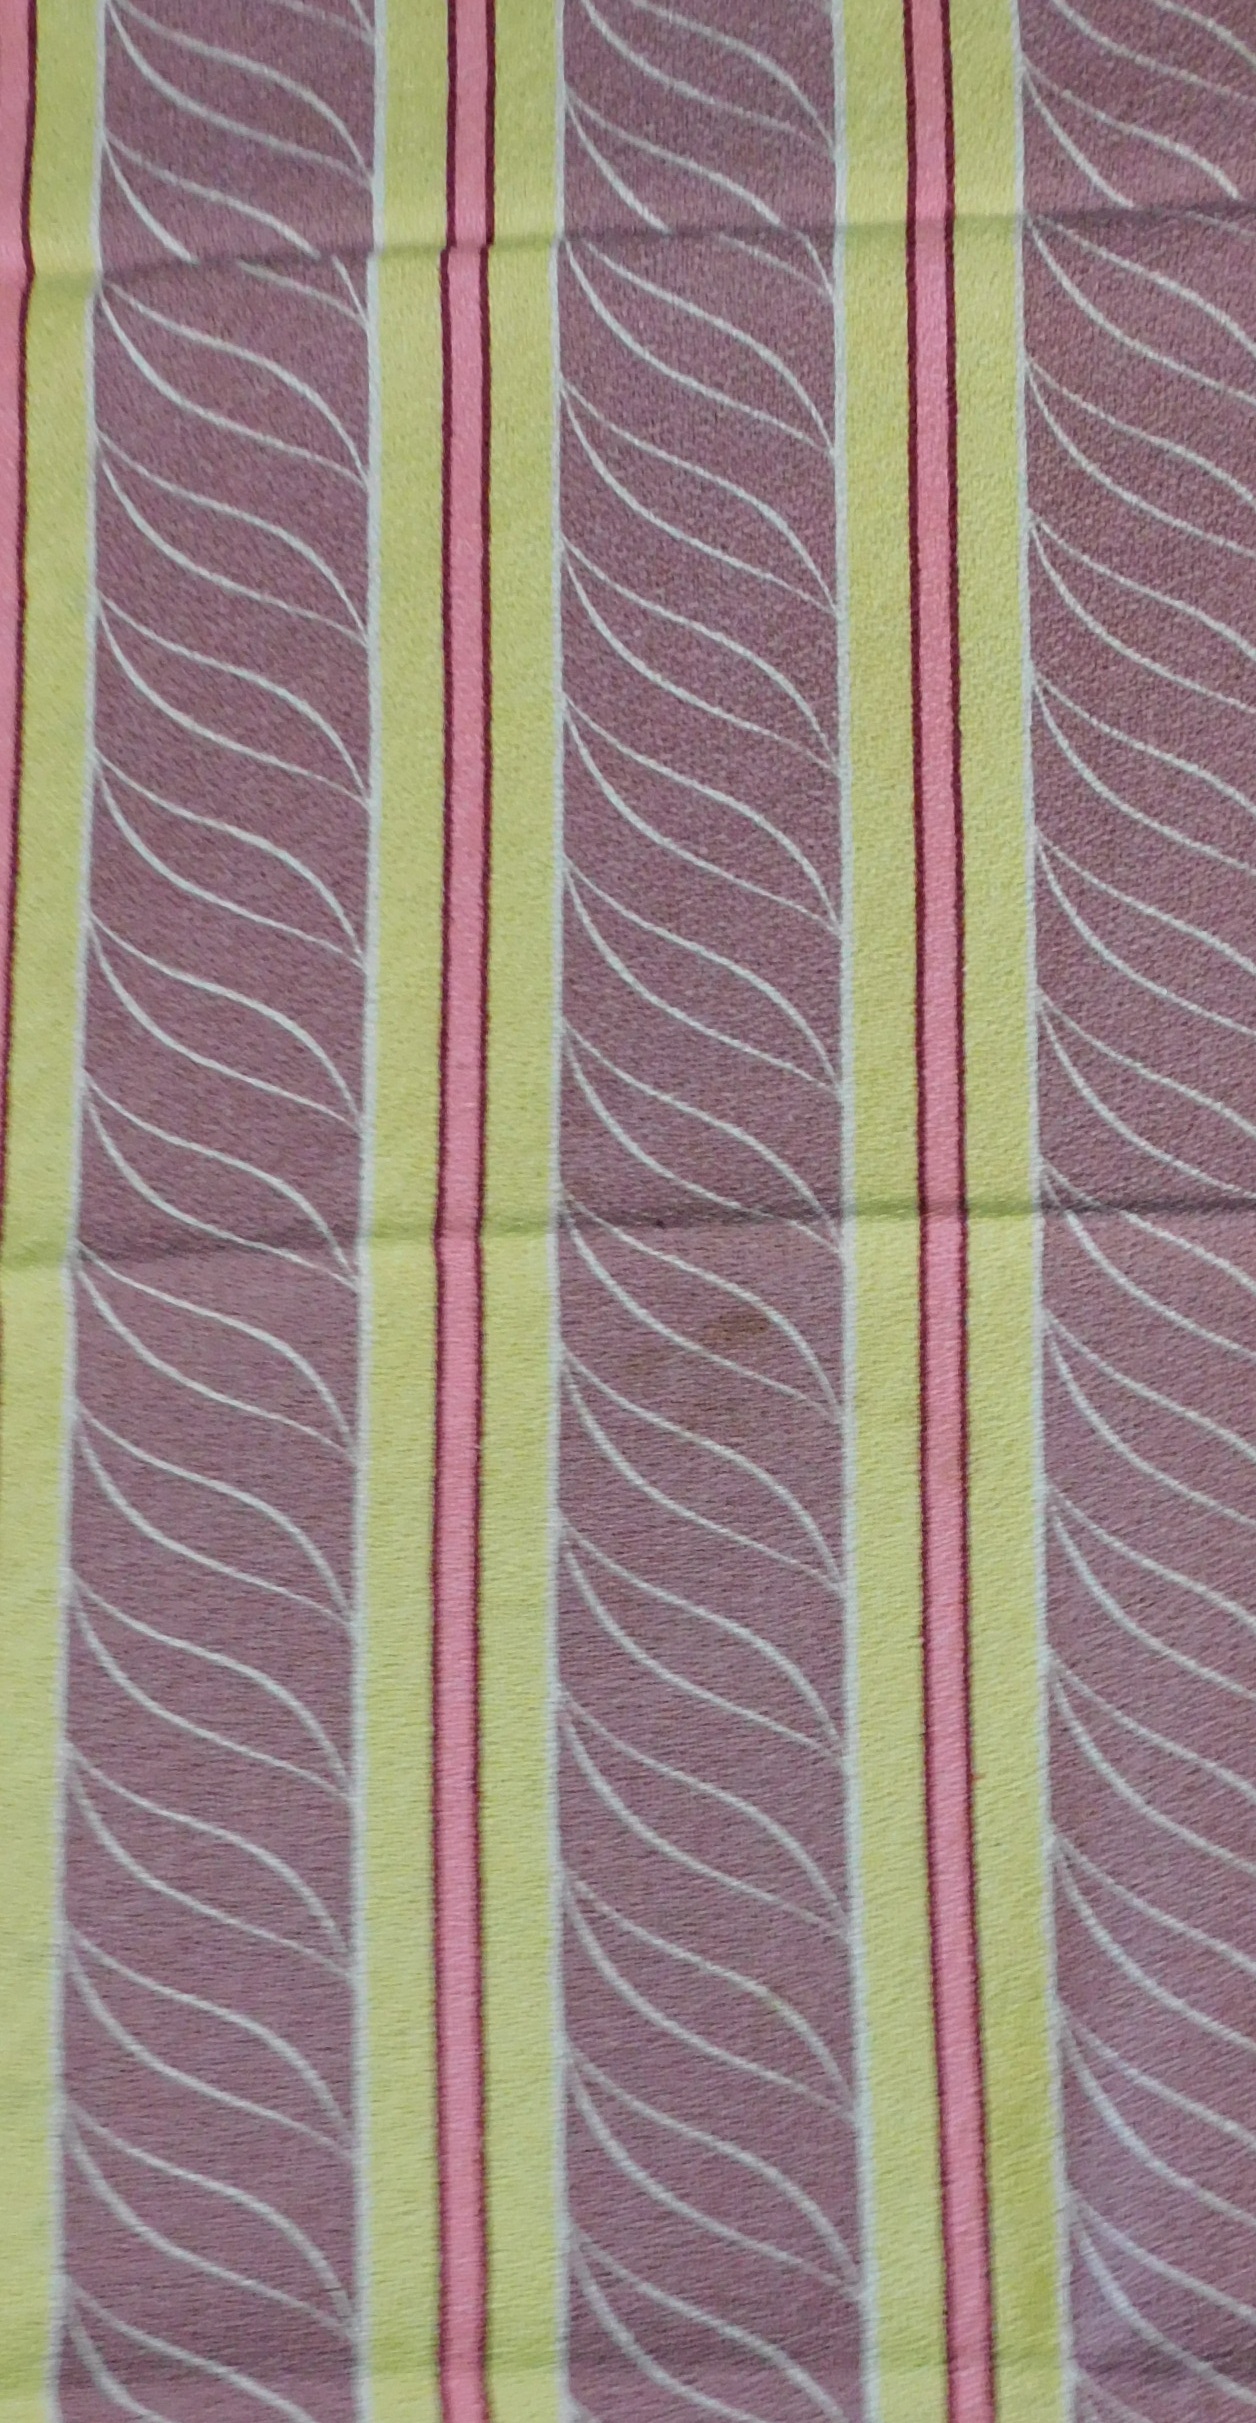 Vintage 1930s Barkcloth Fabric Remnant, 24x33 inches Mauve & Yellow Stripes